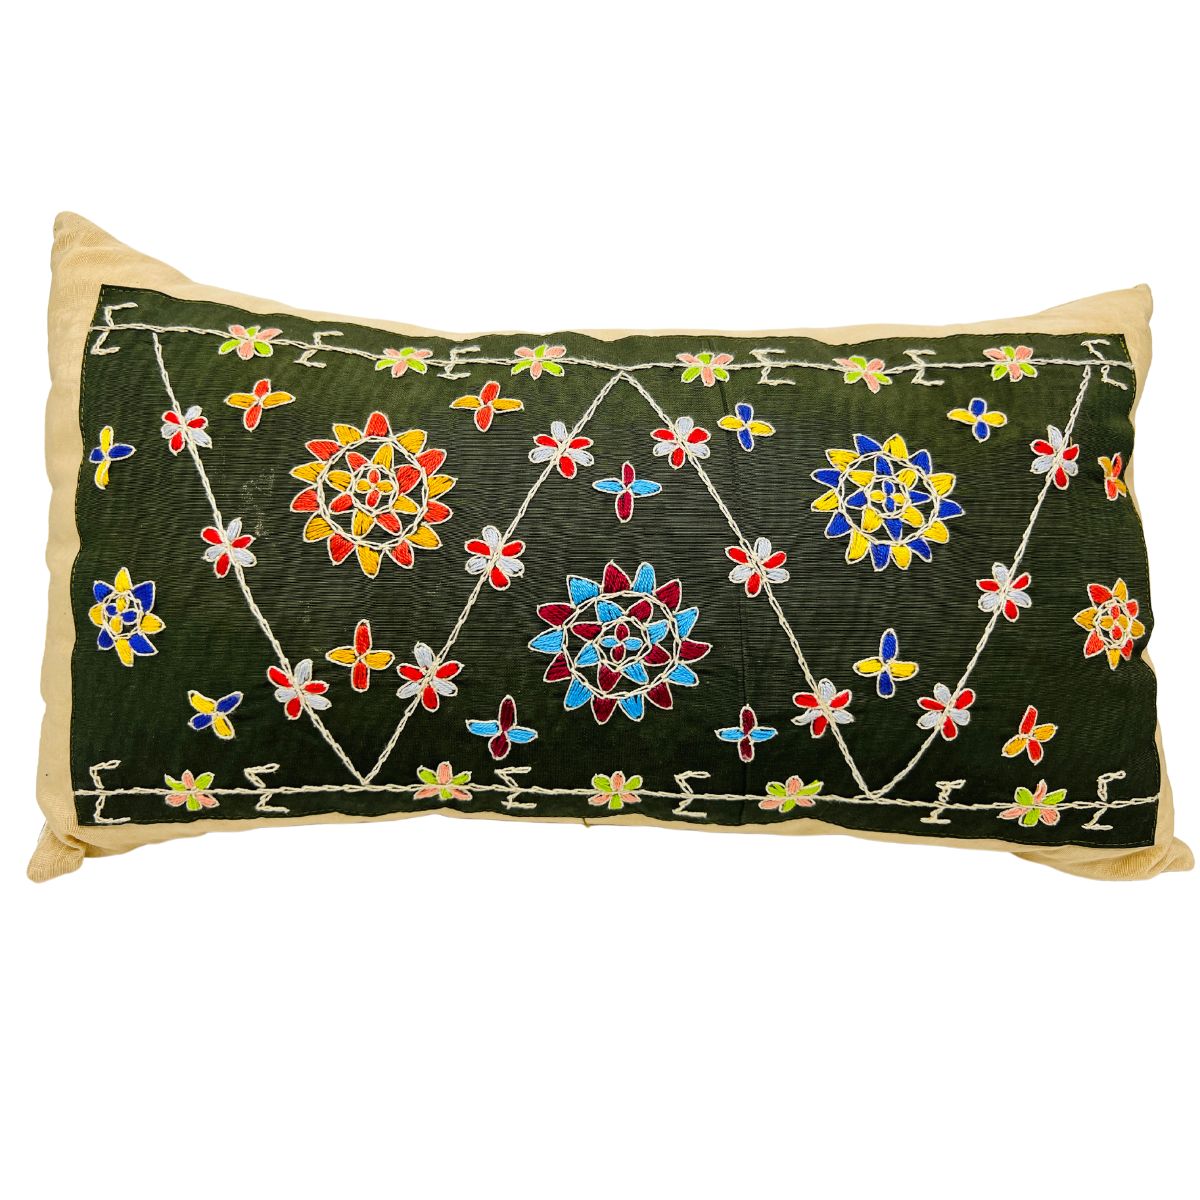 Embroidered Pillow Cover from Gaza